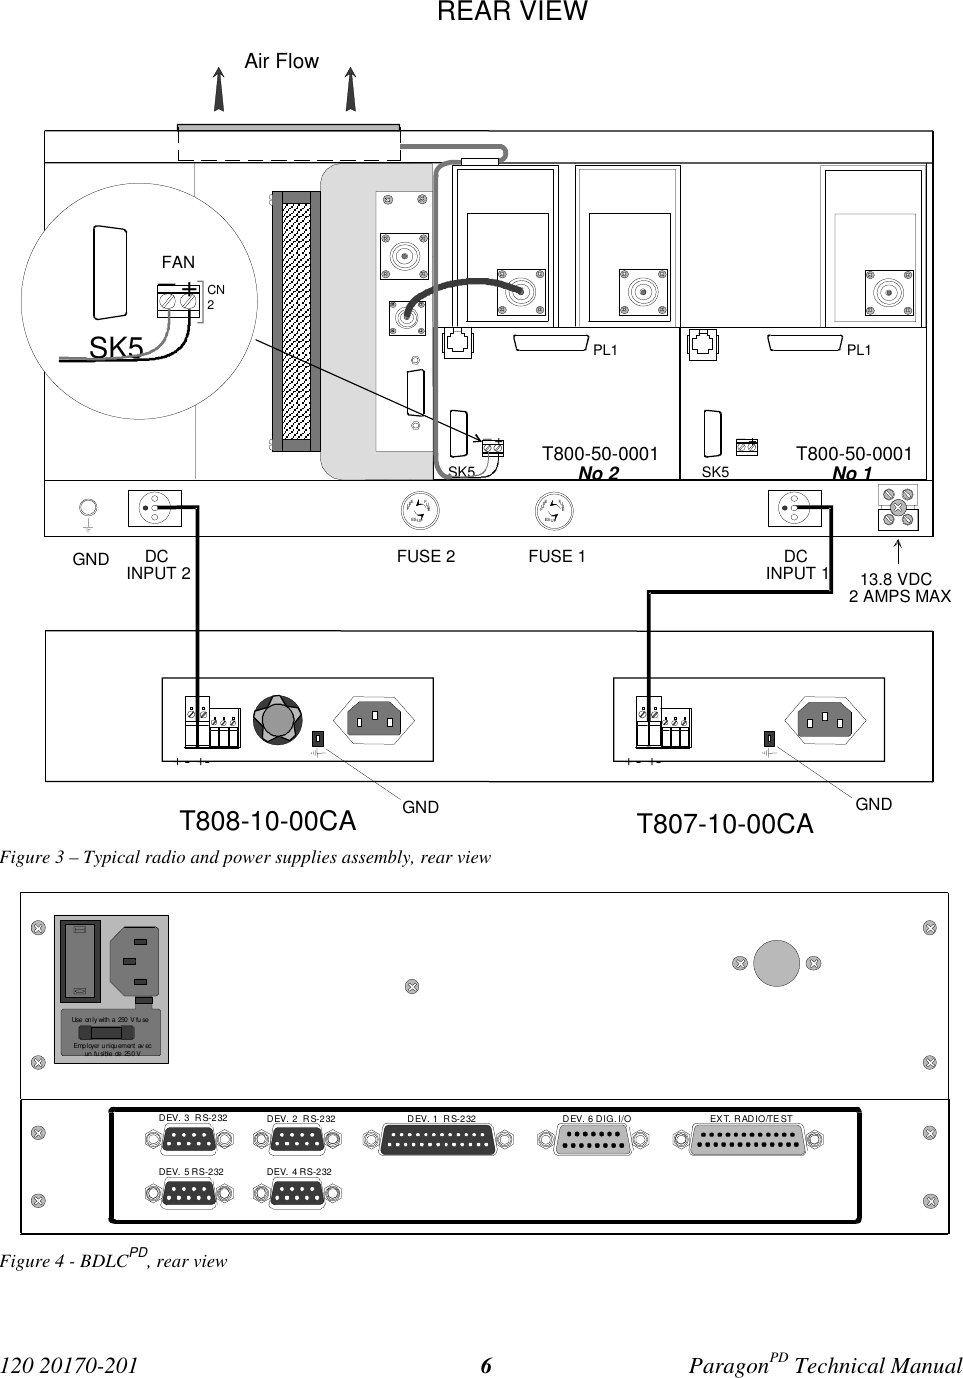 120 20170-201 ParagonPD Technical Manual6Figure 3 – Typical radio and power supplies assembly, rear viewFigure 4 - BDLCPD, rear viewEmployer uniquement avecun  fu si ble  de  250 VUse  on l y with  a  250  V fu seDEV. 3  RS-232DEV. 5  RS-232DEV. 2  RS-232DEV. 4  RS-232DEV. 1  RS-232 DEV. 6 DIG. I/O EXT. RADIO/TESTT808-10-00CA T807-10-00CAREAR VIEWAir FlowGNDDCINPUT 1FUSE 1FUSE 2DCINPUT 2 13.8 VDC2 AMPS MAXFUSEFUSEFUSEFUSEFUSEFUSE+-+-+-+-GNDGNDT800-50-0001No 1PL1SK5T800-50-0001No 2PL1SK5_+_+SK5_+FANCN2